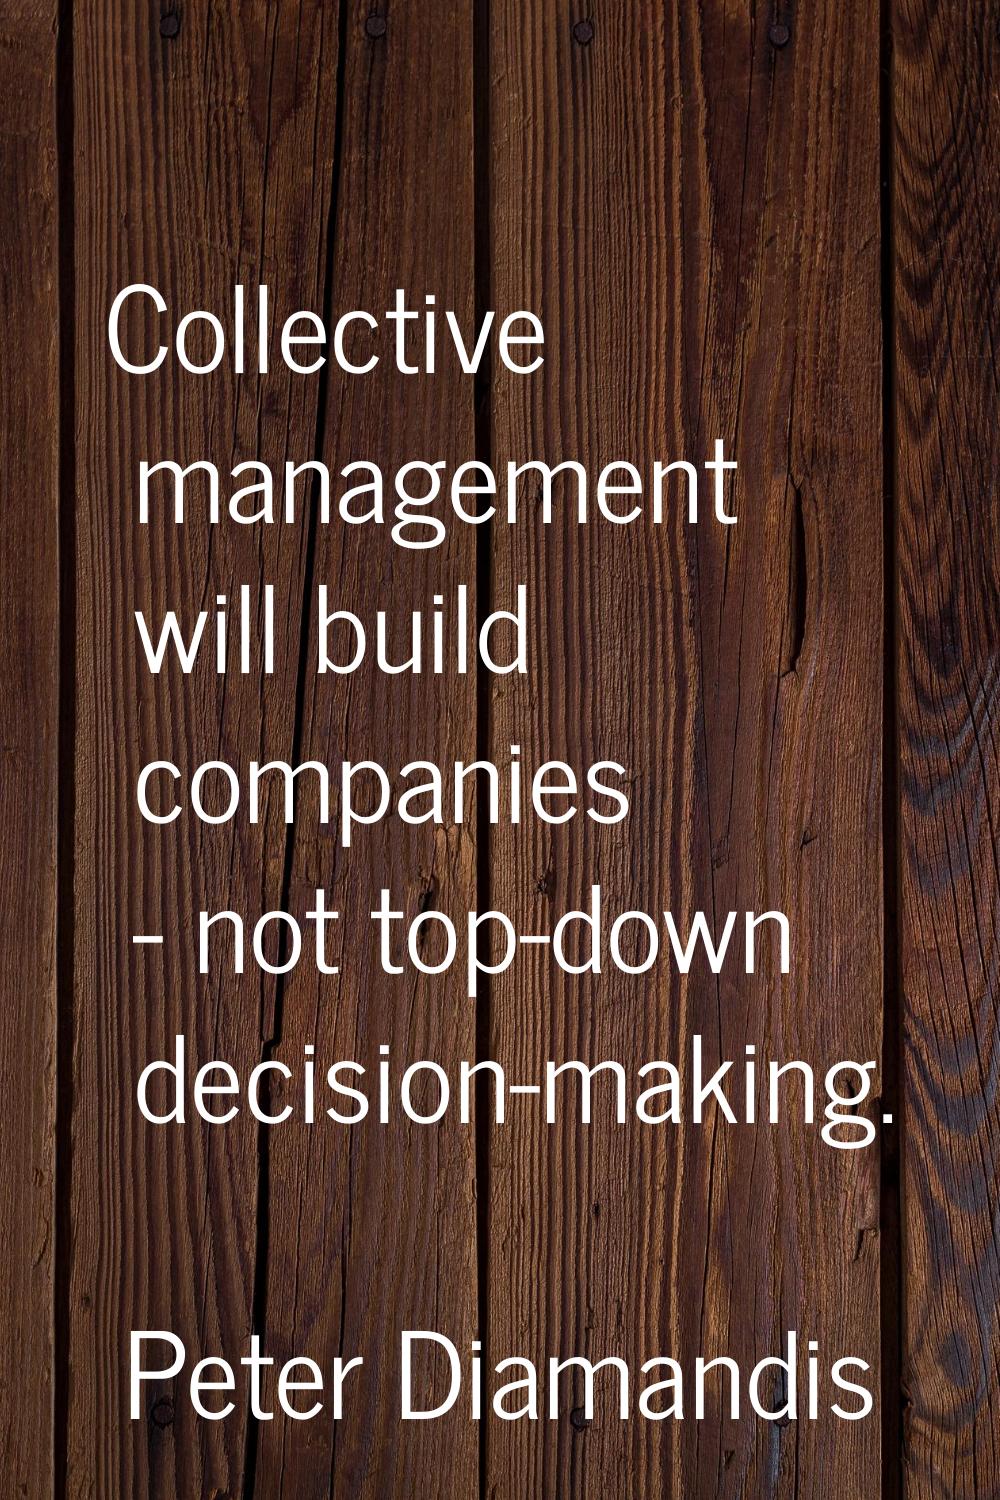 Collective management will build companies - not top-down decision-making.